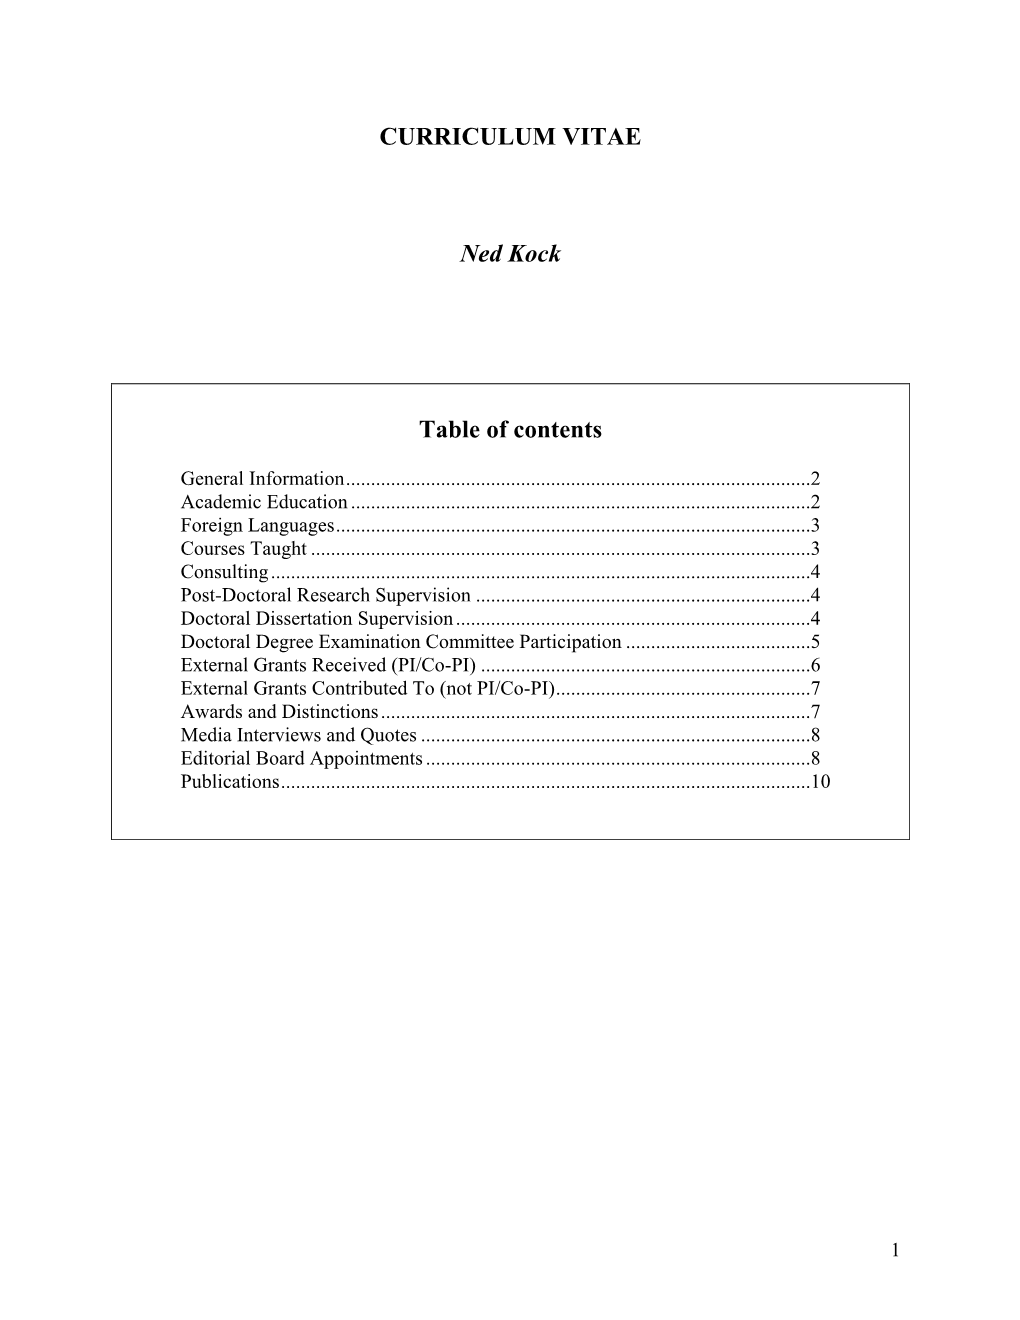 CURRICULUM VITAE Ned Kock Table of Contents